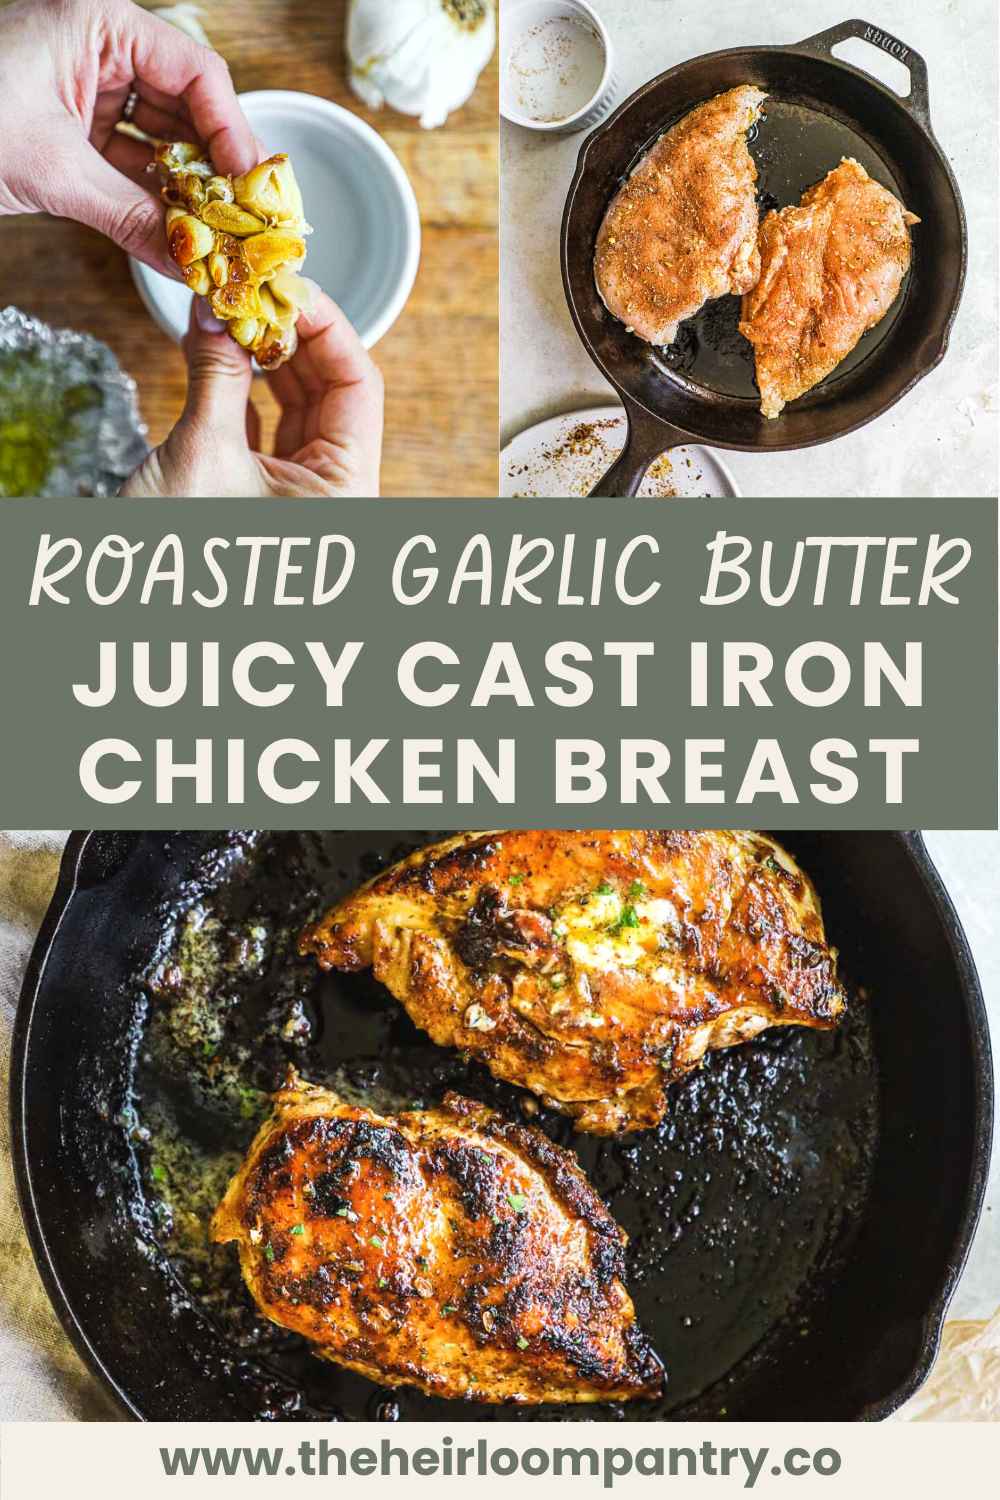 Juicy cast iron chicken breast with herbed roasted garlic butter and lemon juice Pinterest pin.